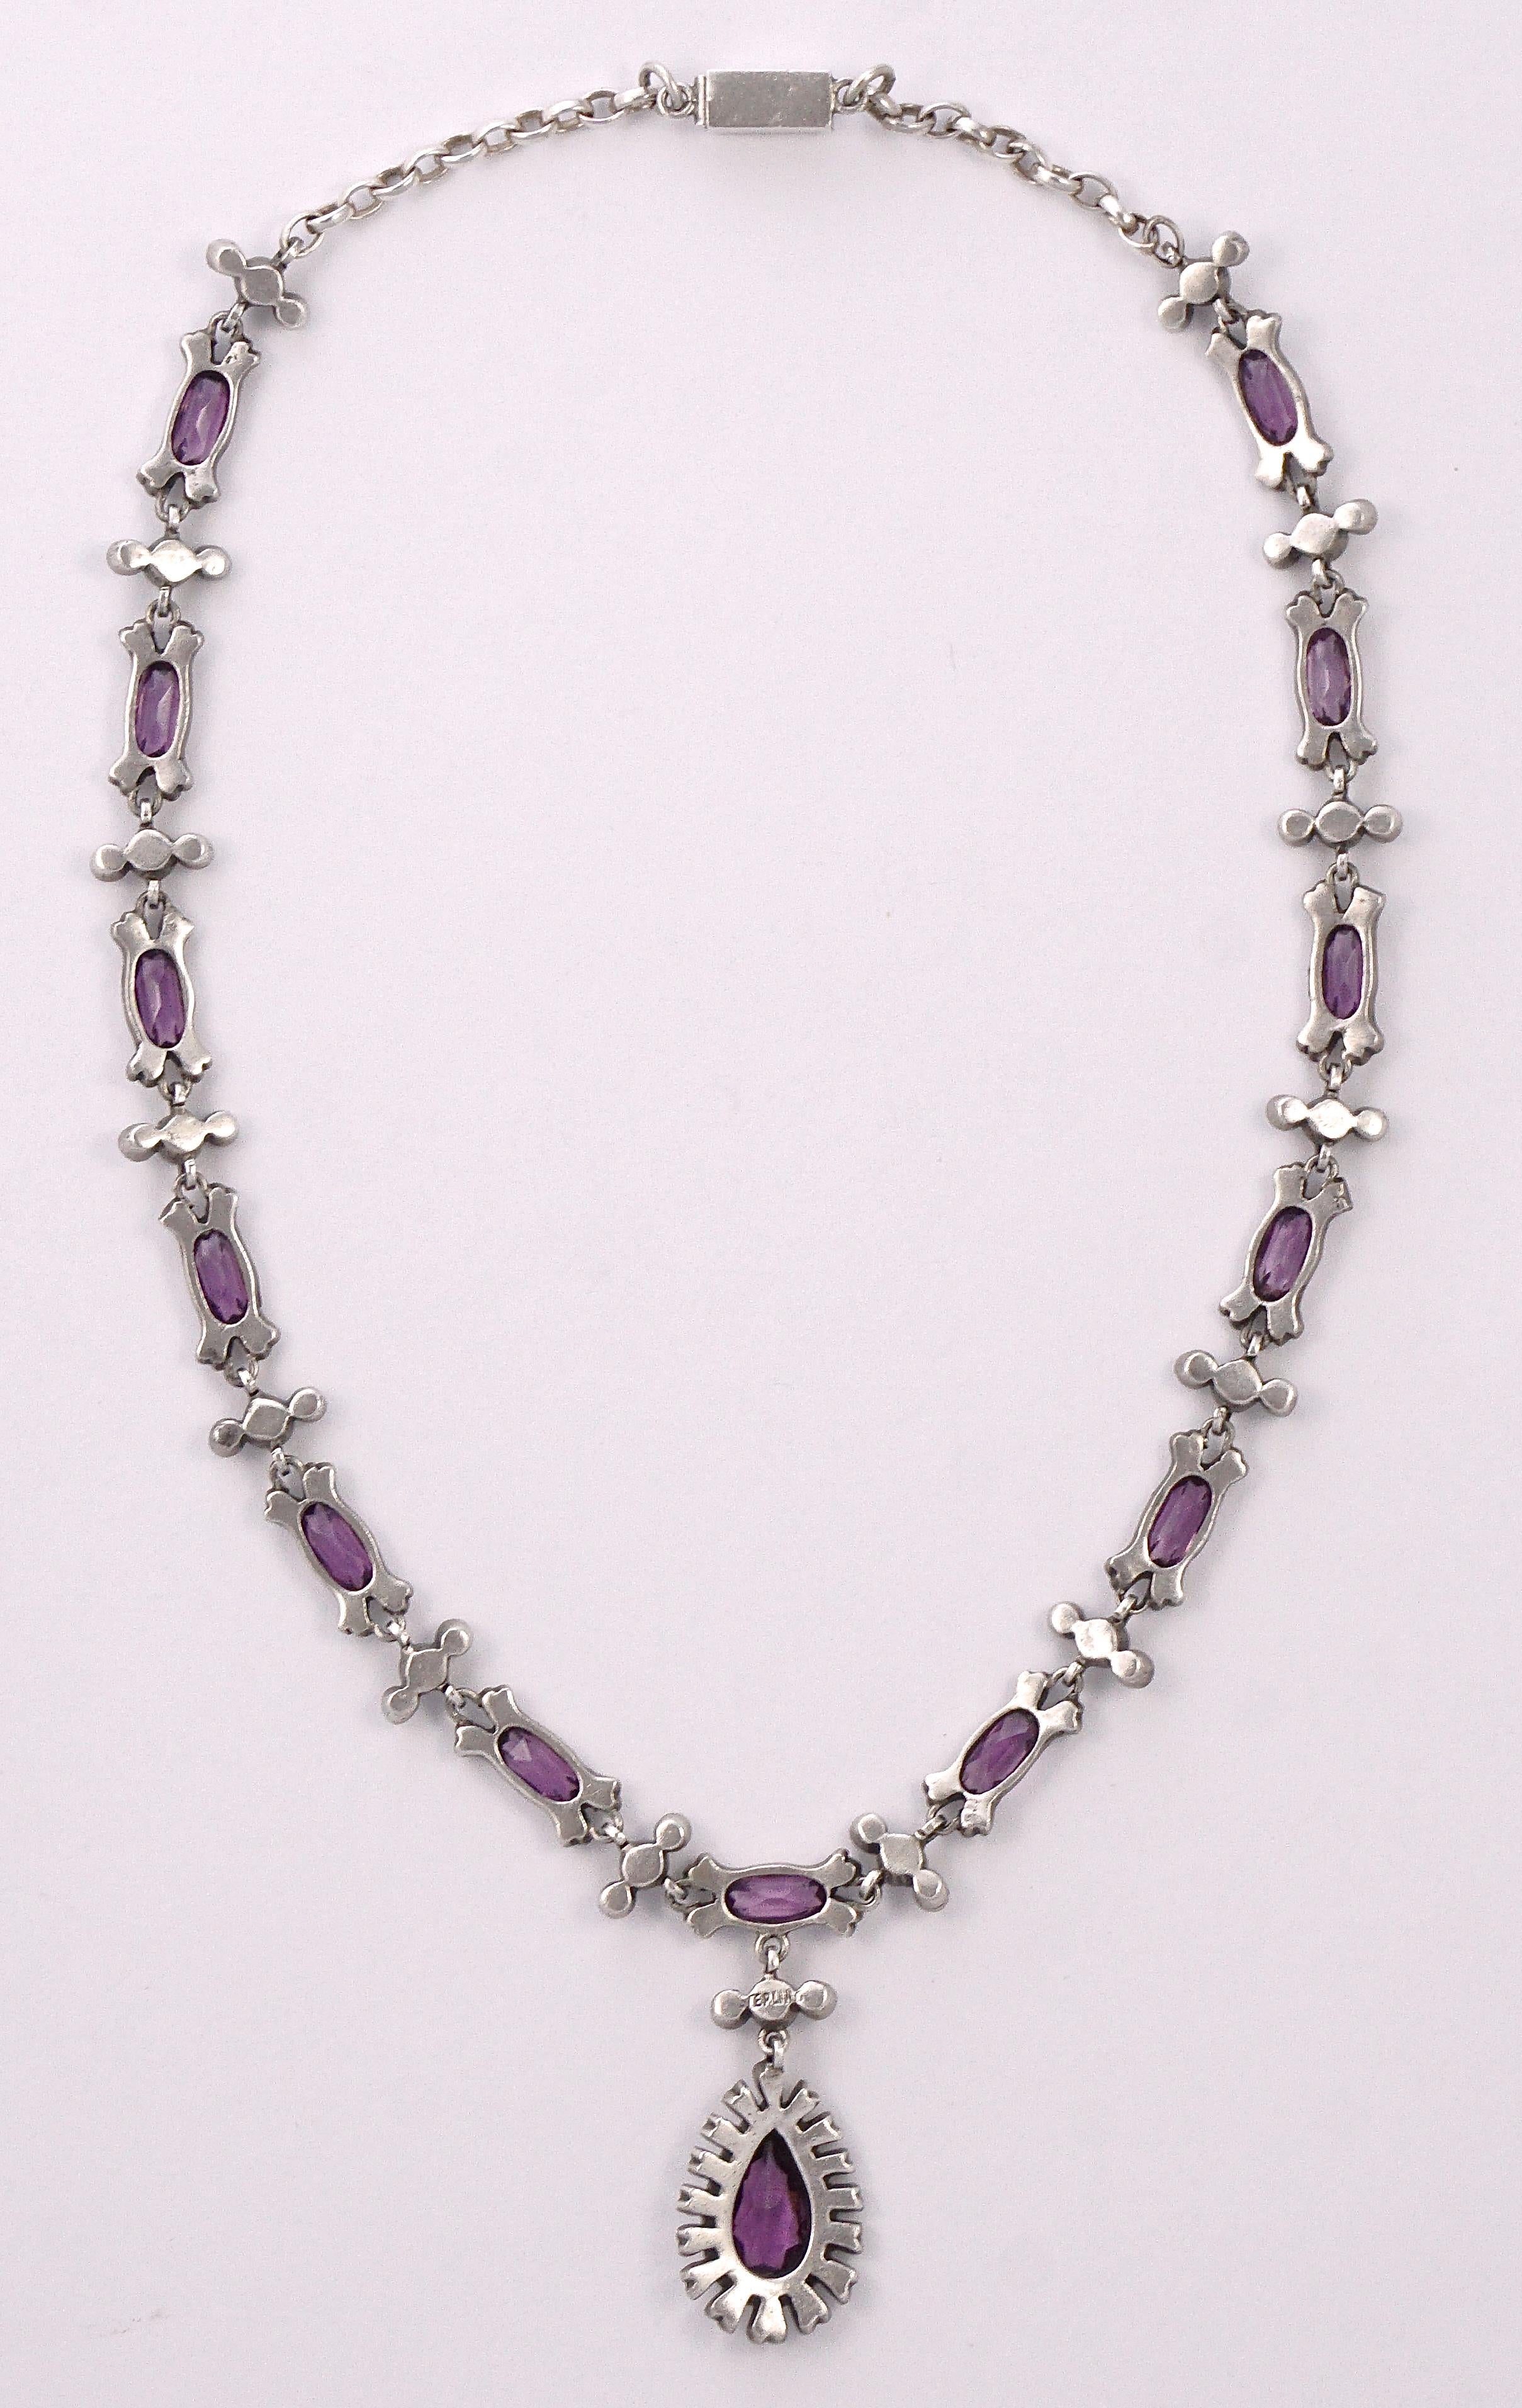 Antique Sterling Silver Lavalier Necklace with White and Amethyst Paste Stones For Sale 2